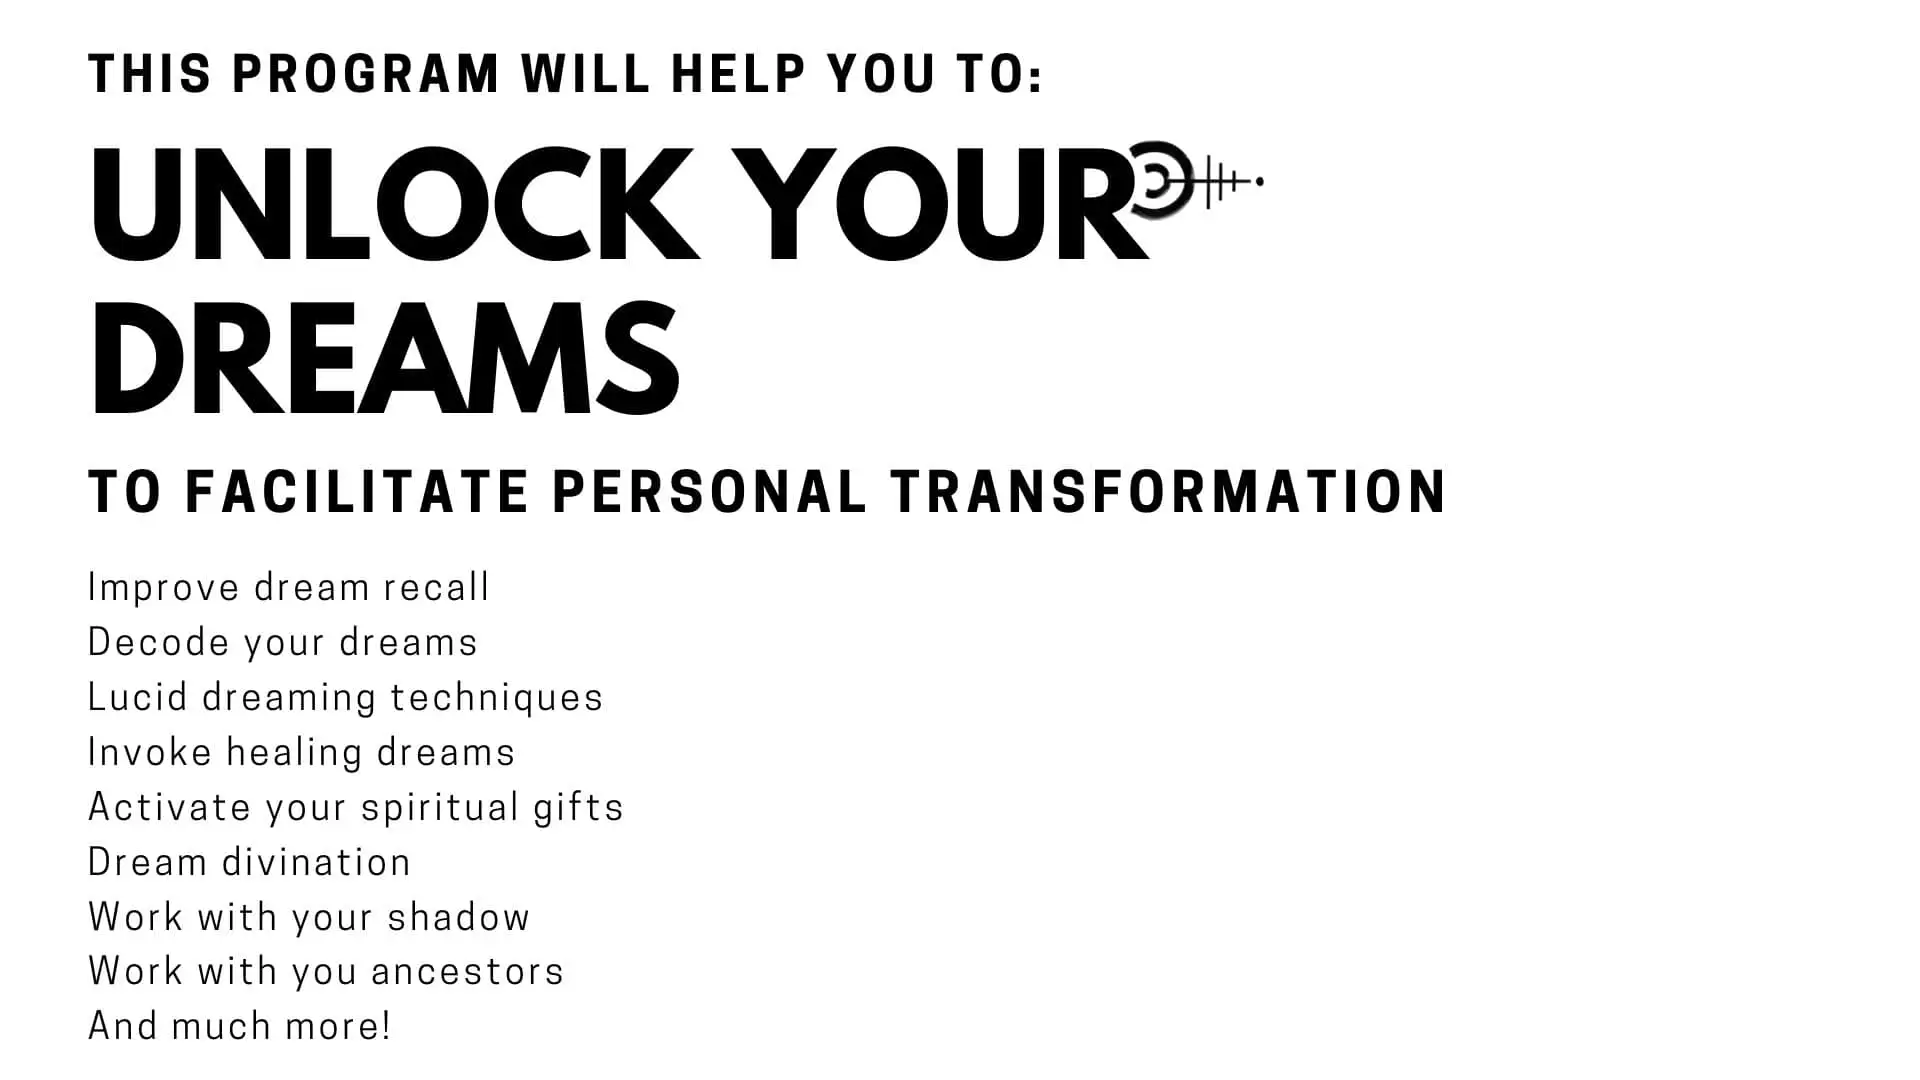 This program will help you to unlock your dreams to facilitate transformation, Improve dream recall Decode your dreams Lucid dreaming techniques Invoke healing dreams Activate your spiritual gifts Dream divination Work with your shadow Work with you ancestors And much more!